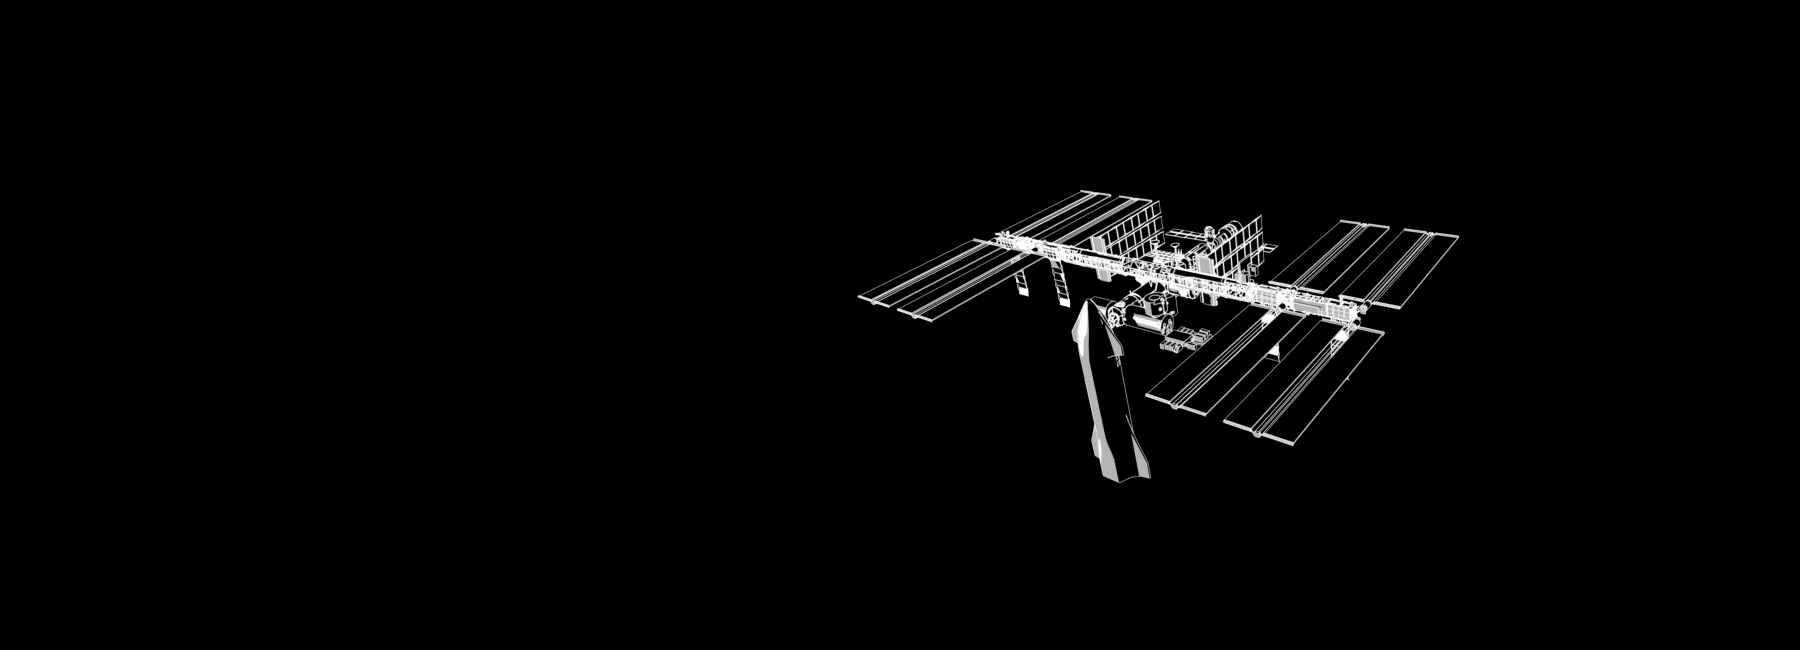 Starship docked to the ISS